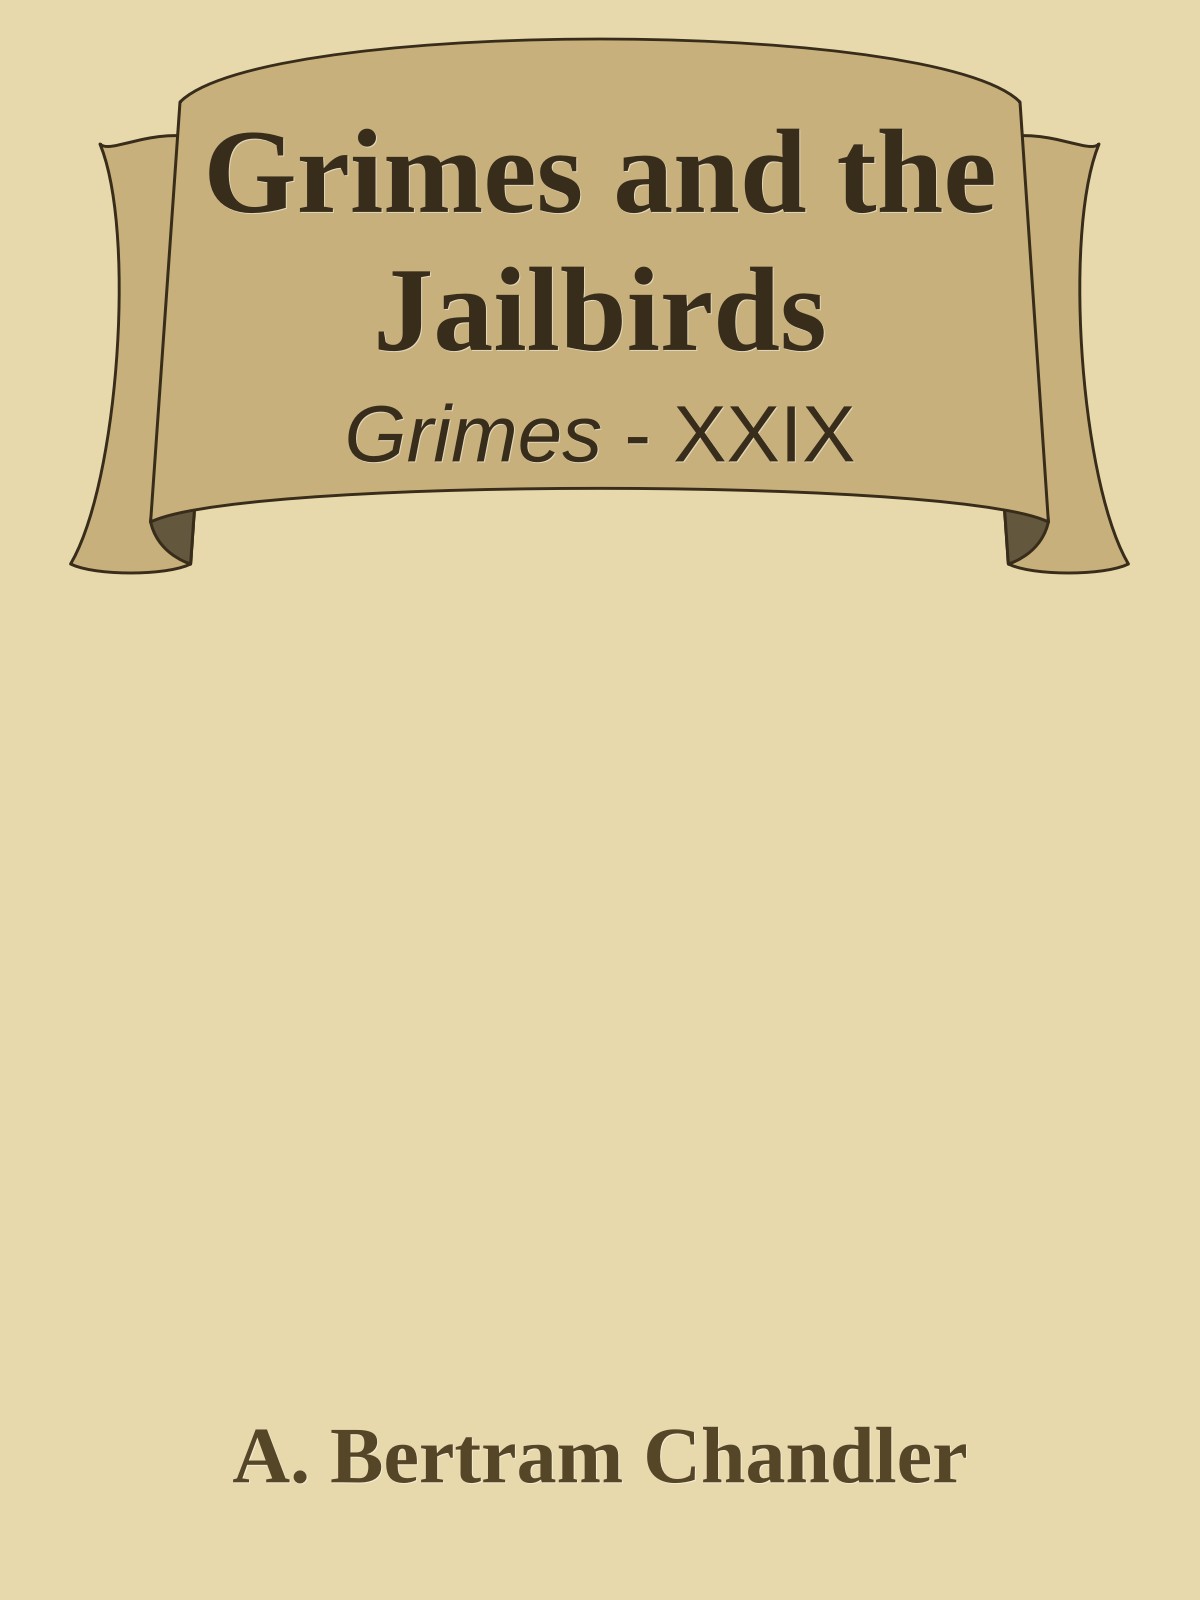 Grimes and the Jailbirds